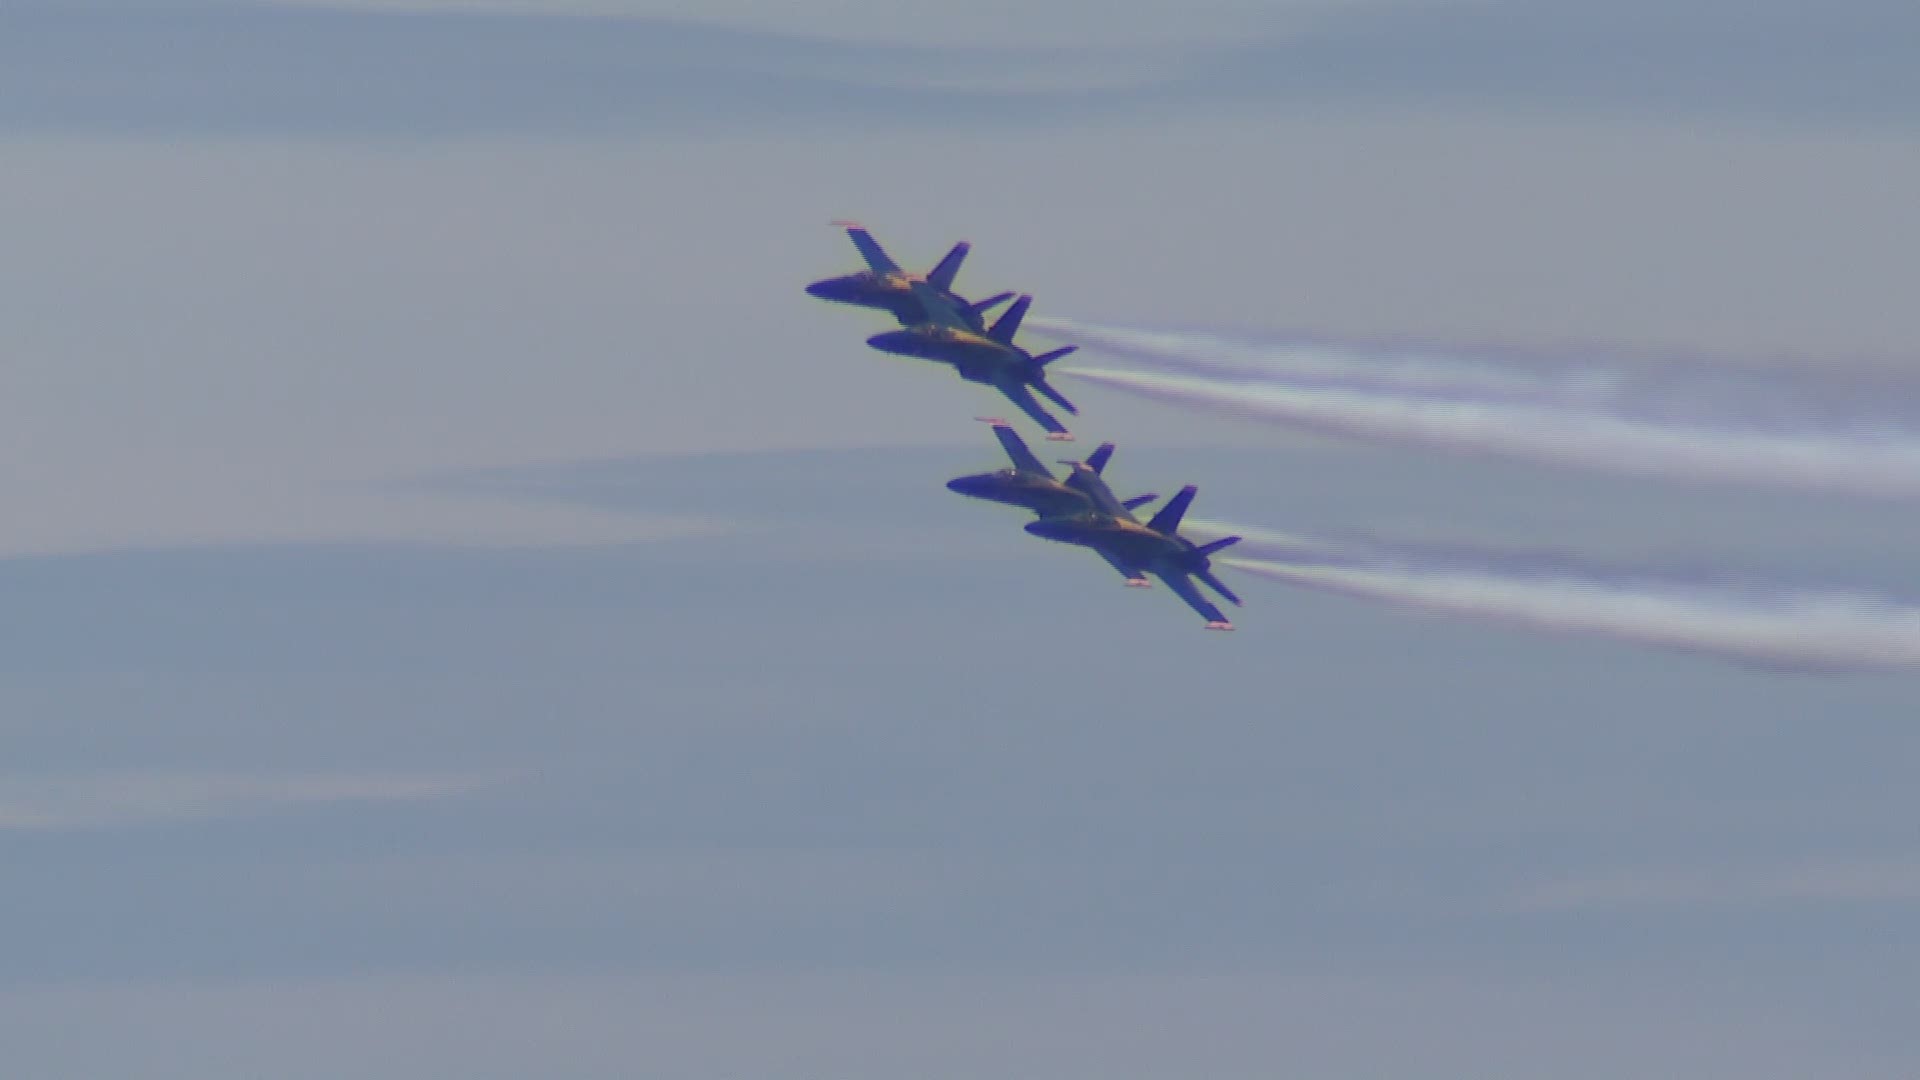 The Blues Angels practiced over Lake Washington Thursday ahead of their weekend performance as part of the Seafair celebration.